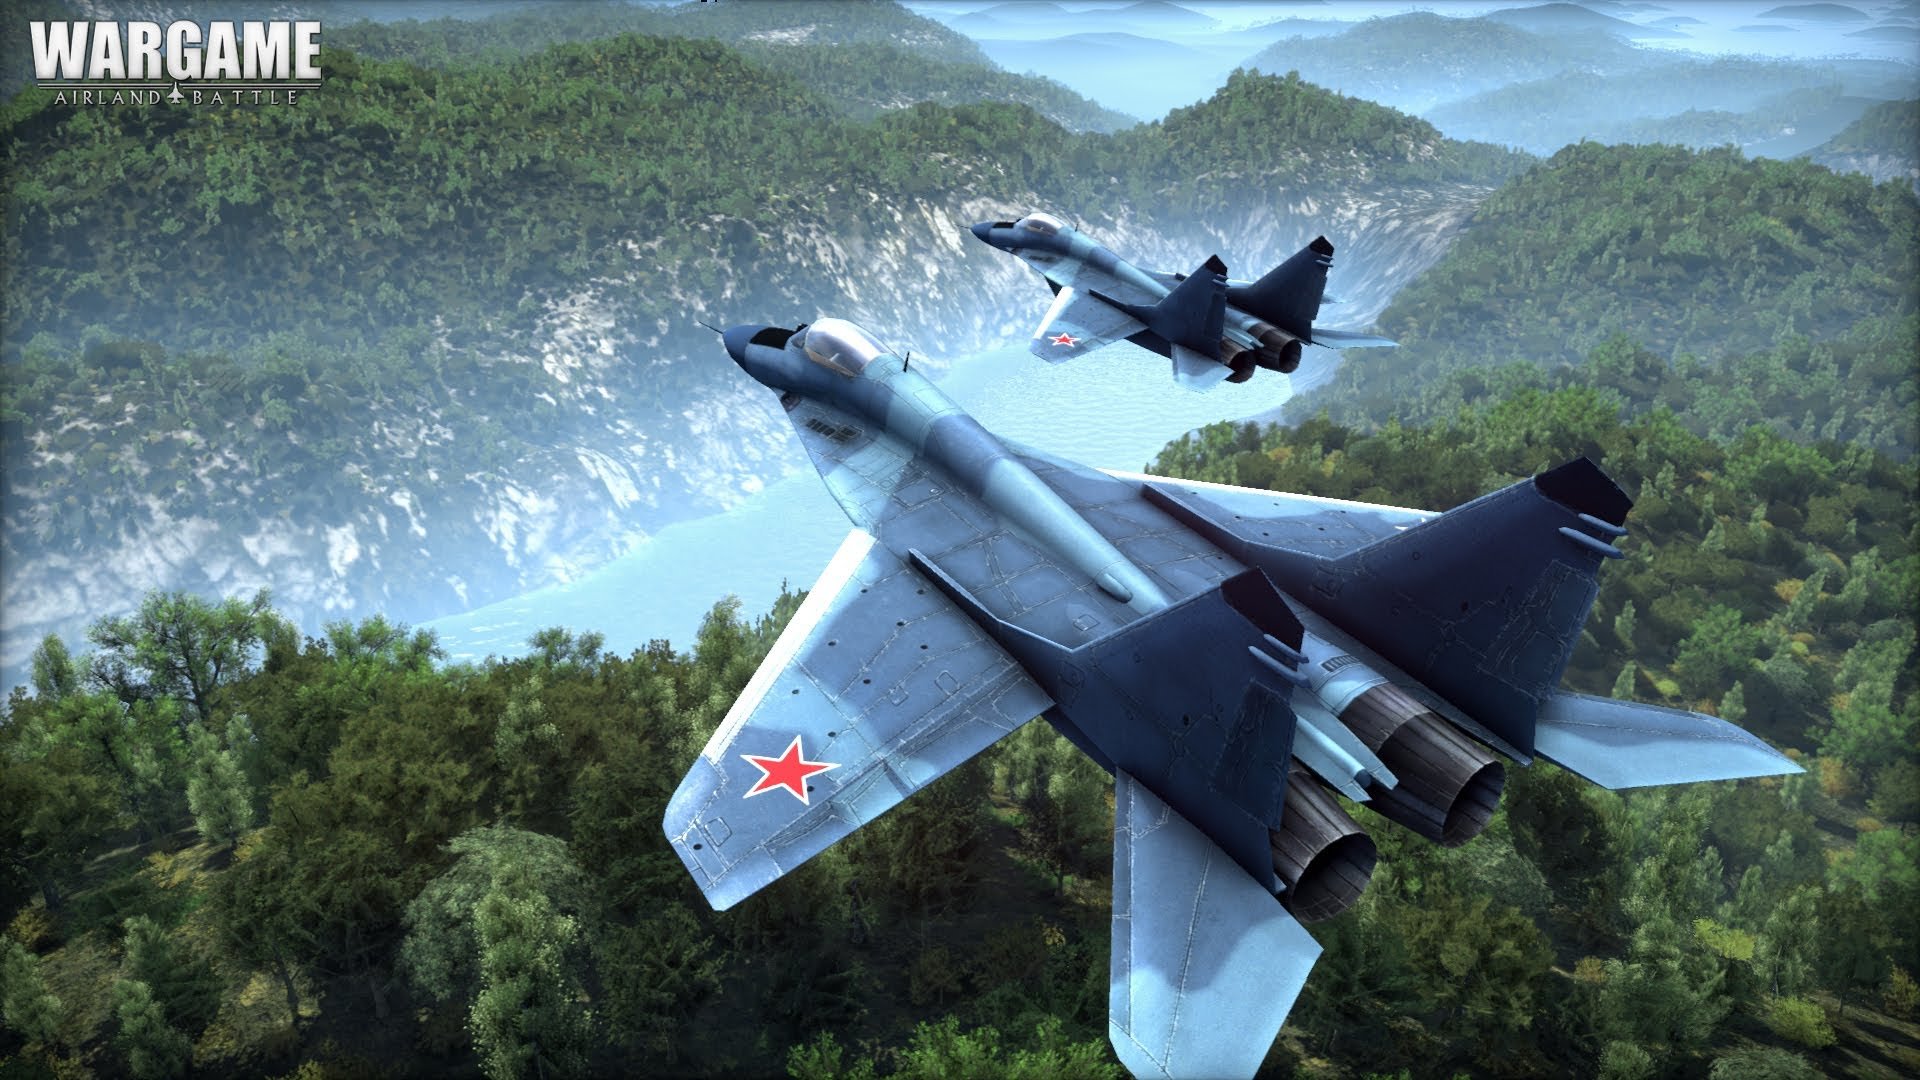 wargame, Game, Video, Military, War, Battle, Wwll, Air, Force, Fighter, Jet, Warplane, Plane, Aircraft, Action, Fighting, Combat, Flight, Simulator, Mmo, Online, Shooter, Weapon, Tank, Strategy Wallpaper